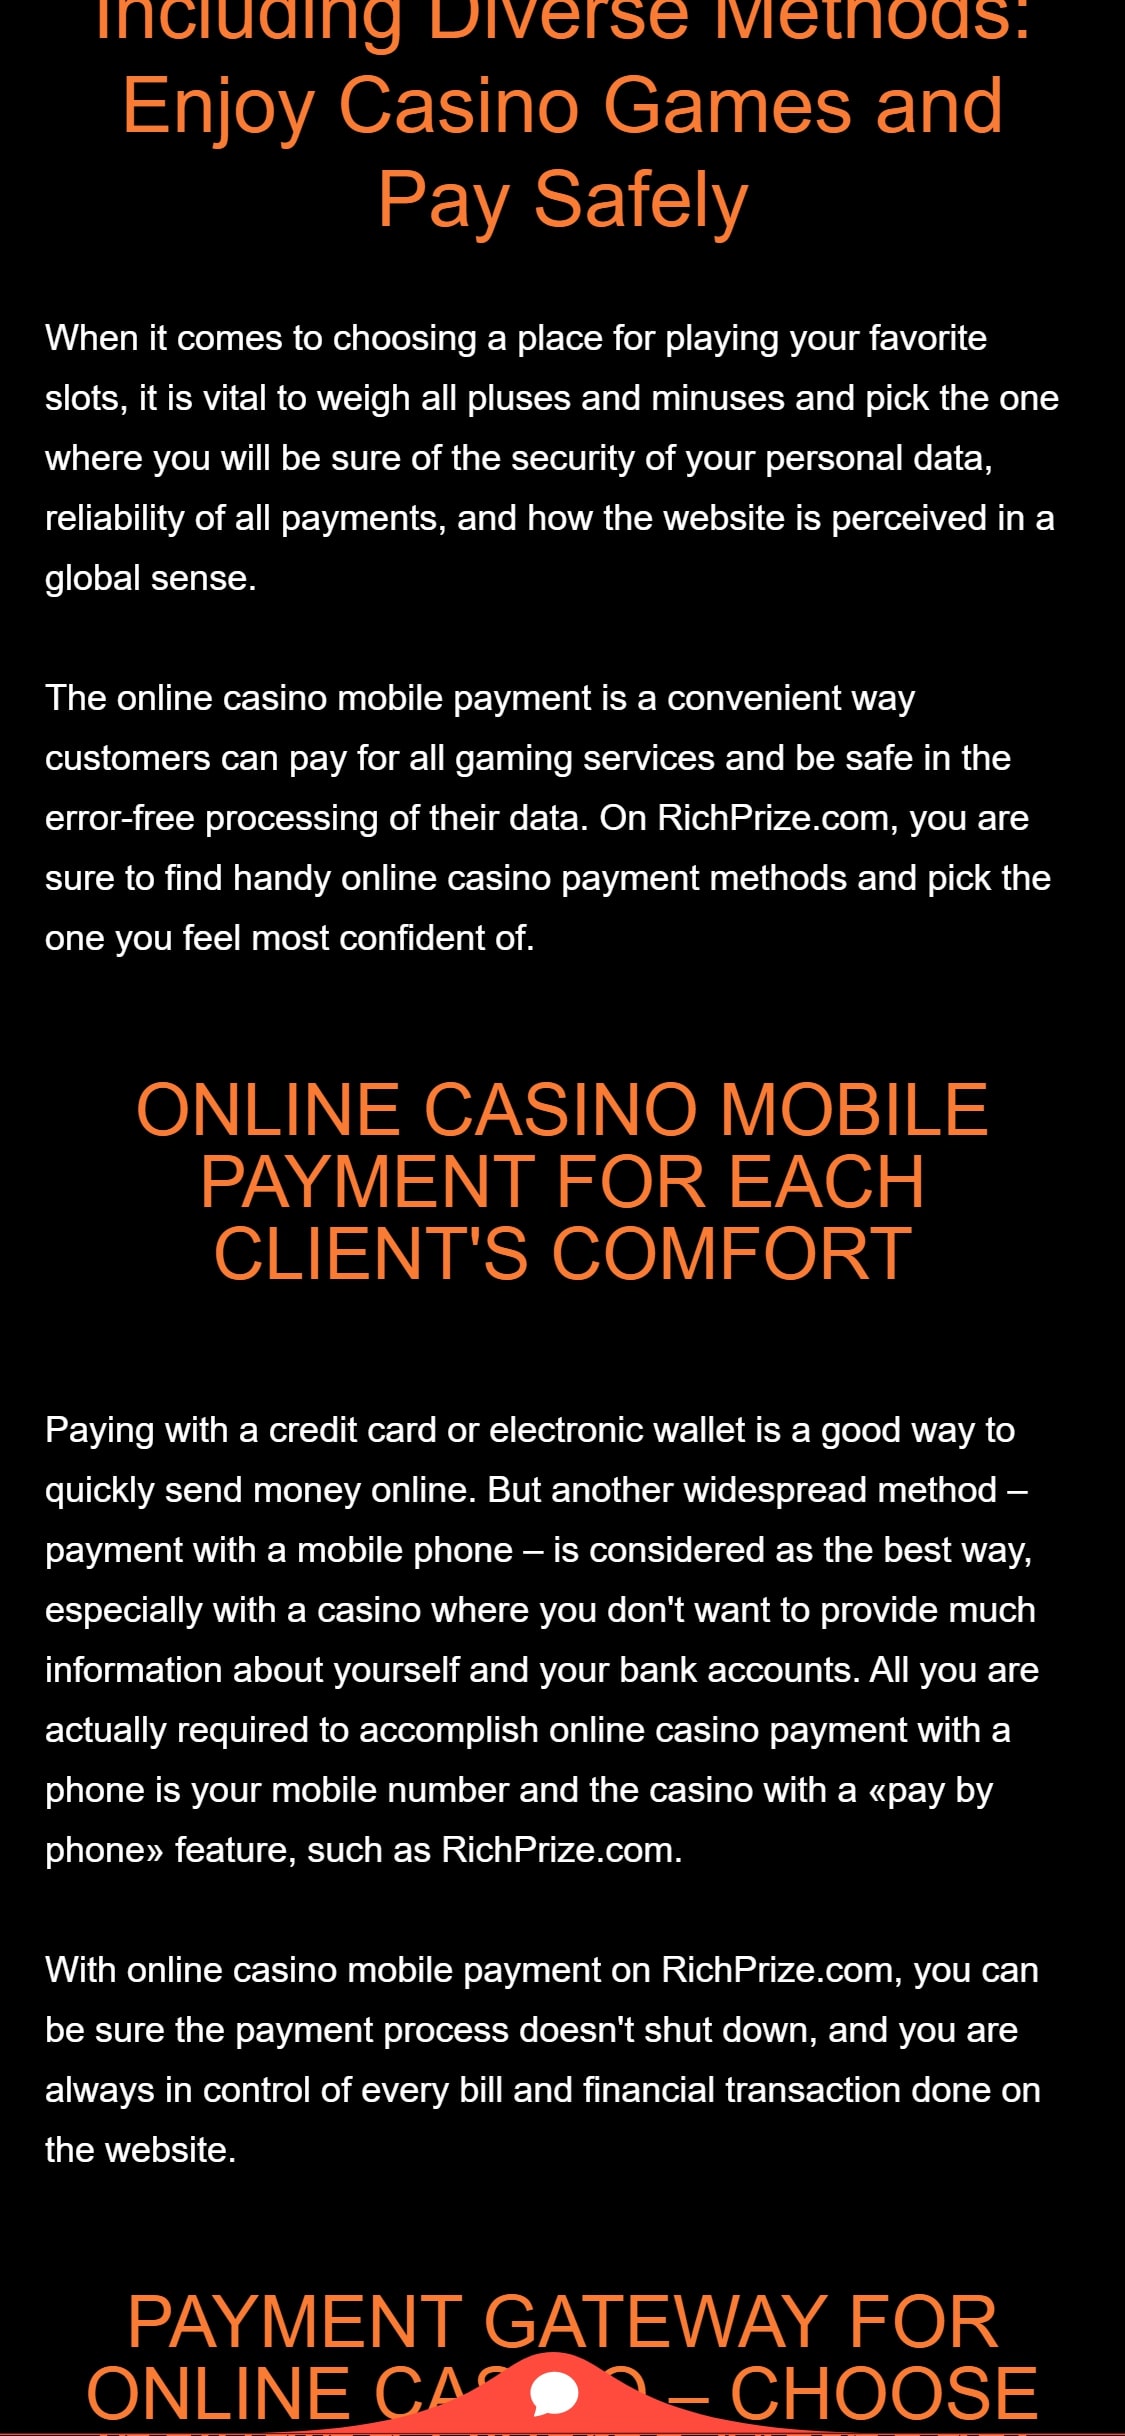 RichPrize Casino Mobile Payment Methods Review